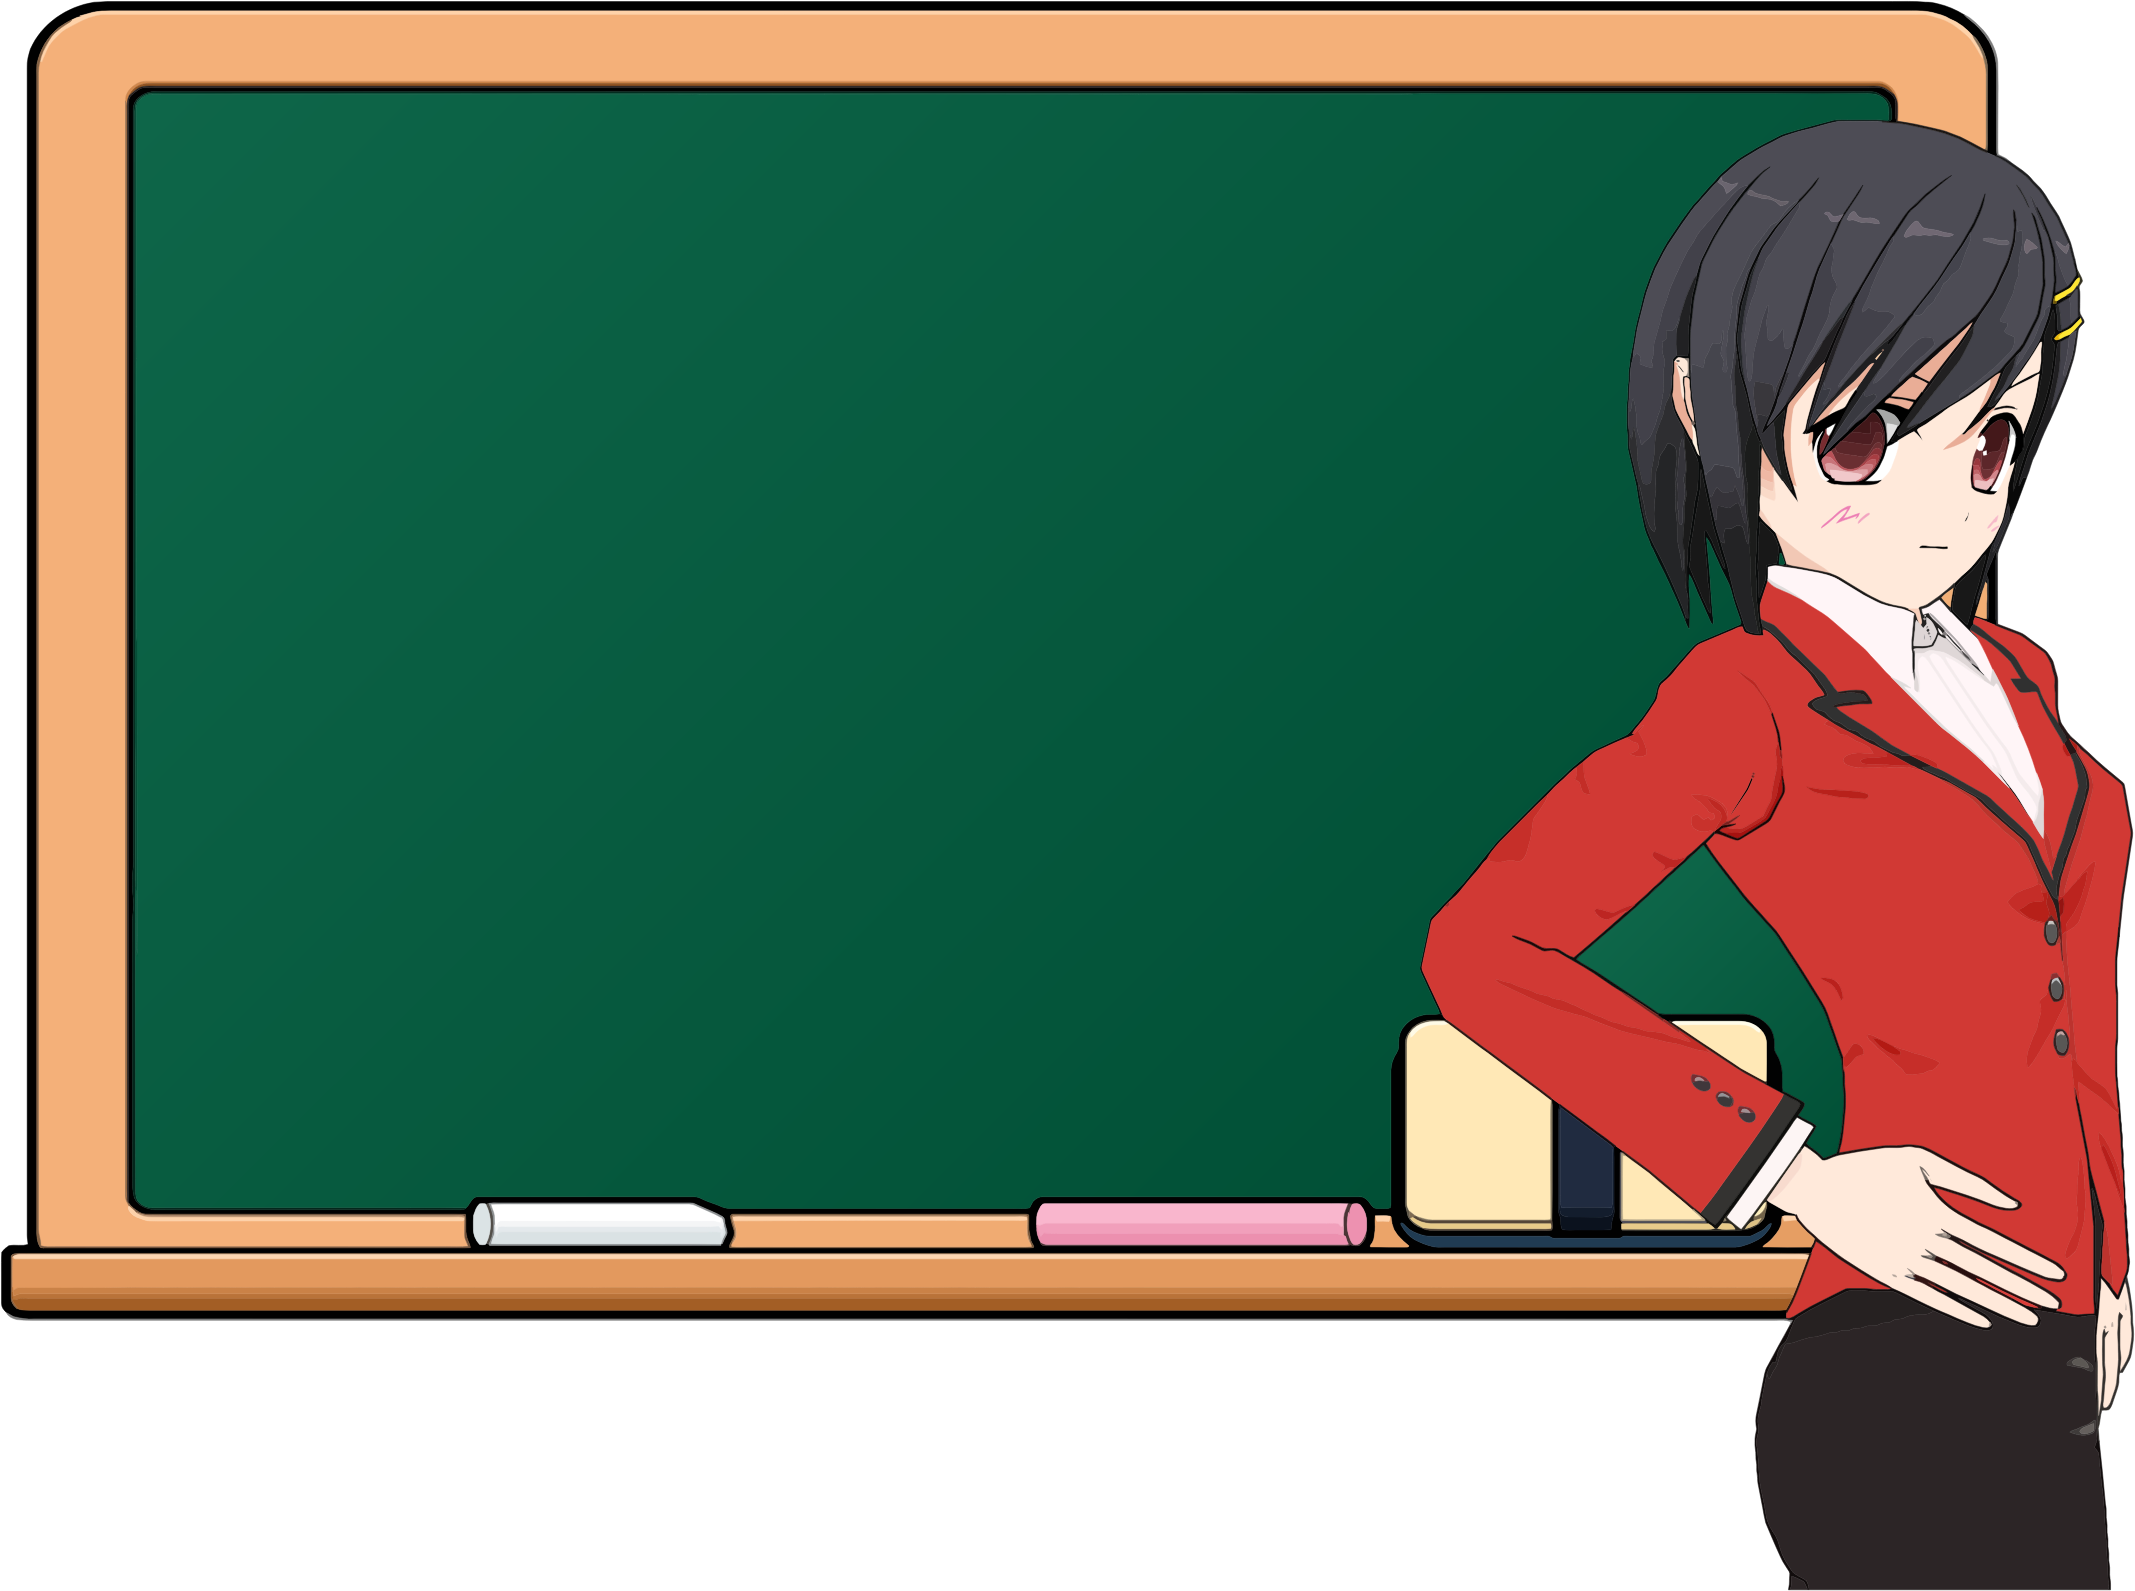 Anime girl icons png. Clipart school chalkboard